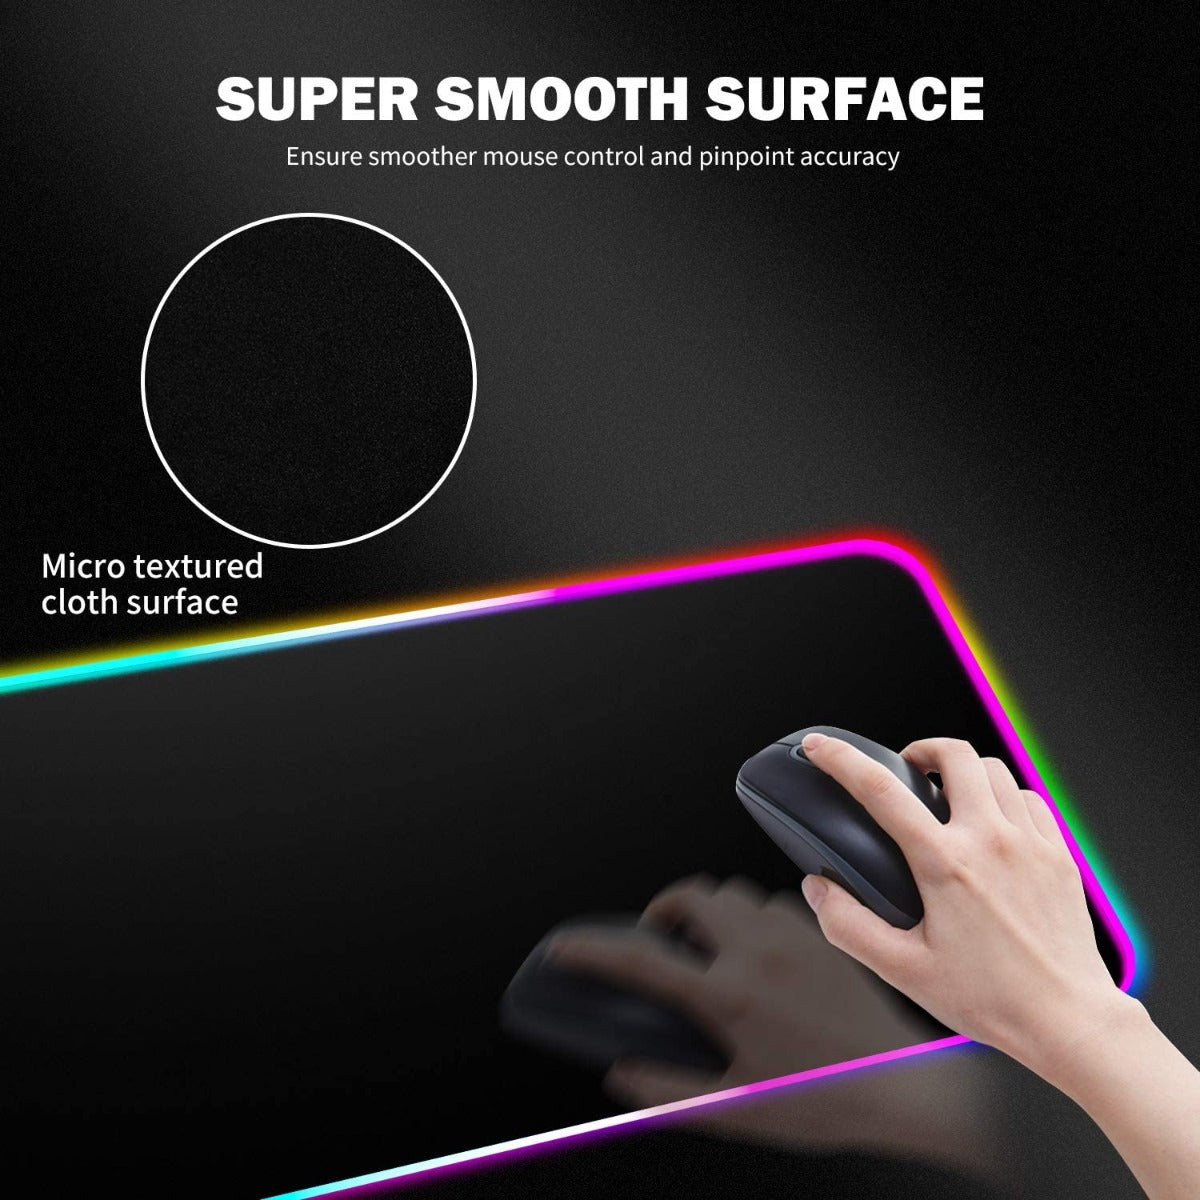 Mytrix Large RGB Wireless Charger Gaming Mouse Pad